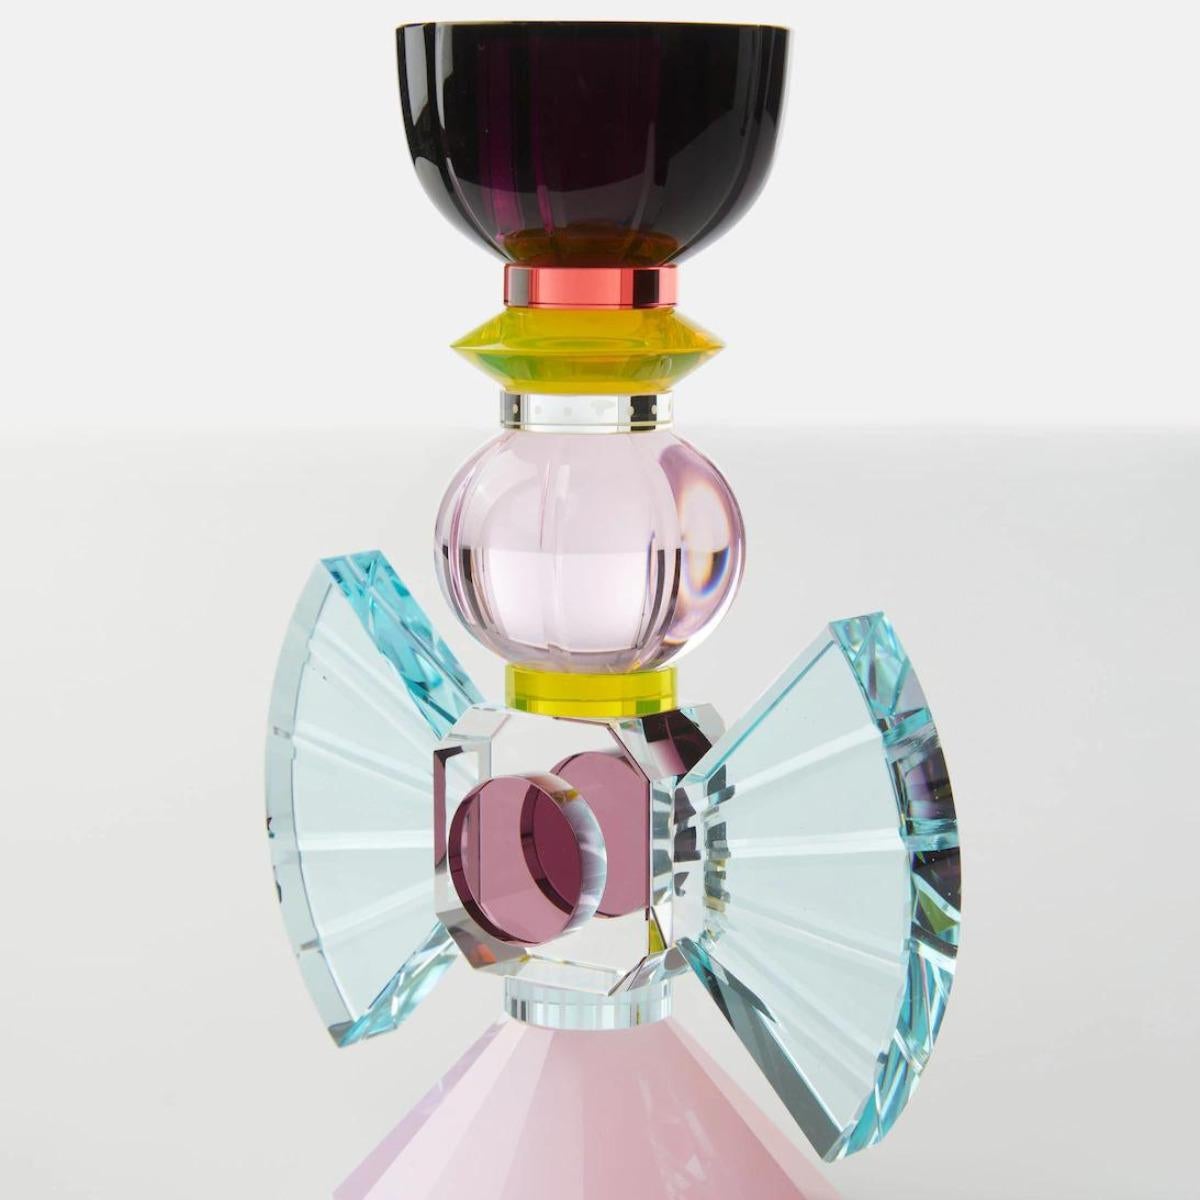 Large crystal candlestick, LAG model, 21st century.

Delightful contemporary crystal candlestick in cheerful colours. 
Estimated production time: 2 to 6 weeks. 

h: 16cm ; w: 10.5cm, d: 10.5cm
